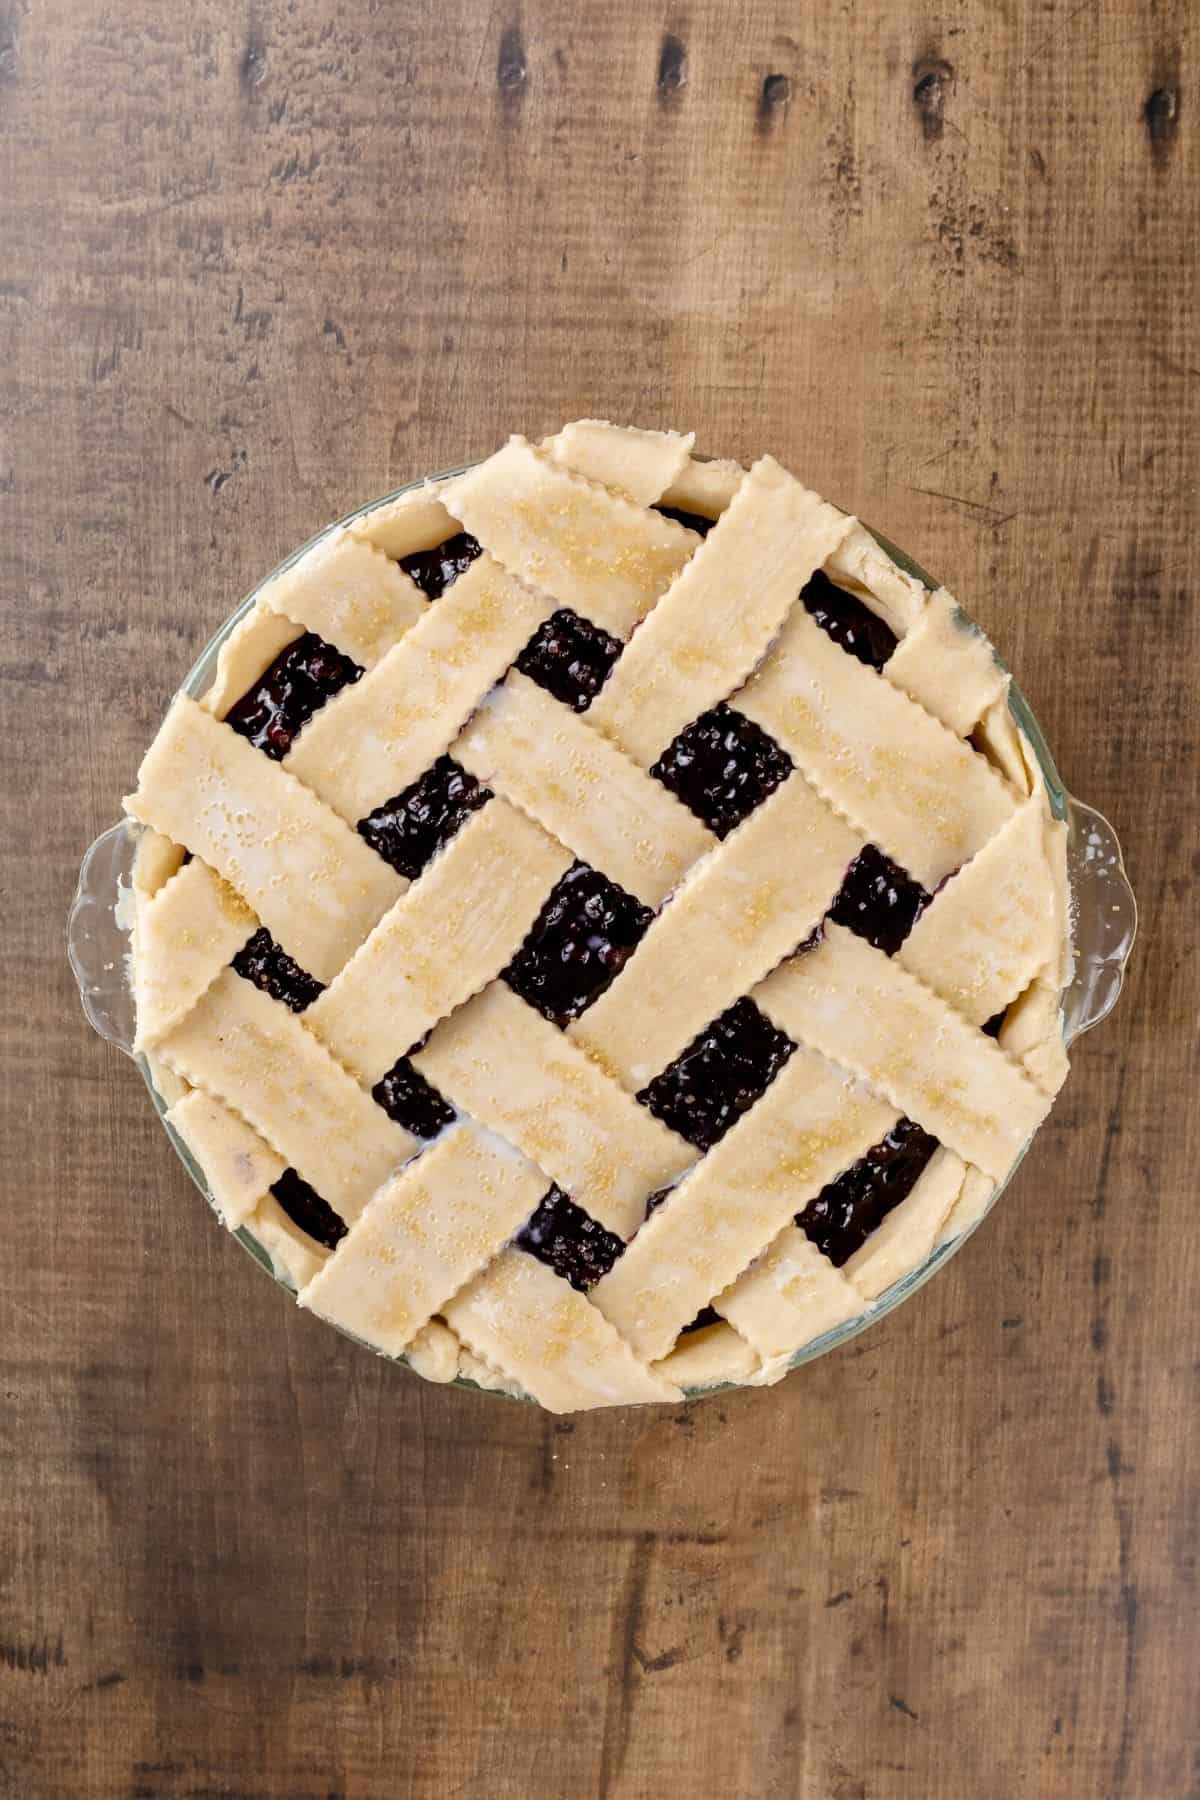 Showing the lattice work on top of a blueberry pie before baking.